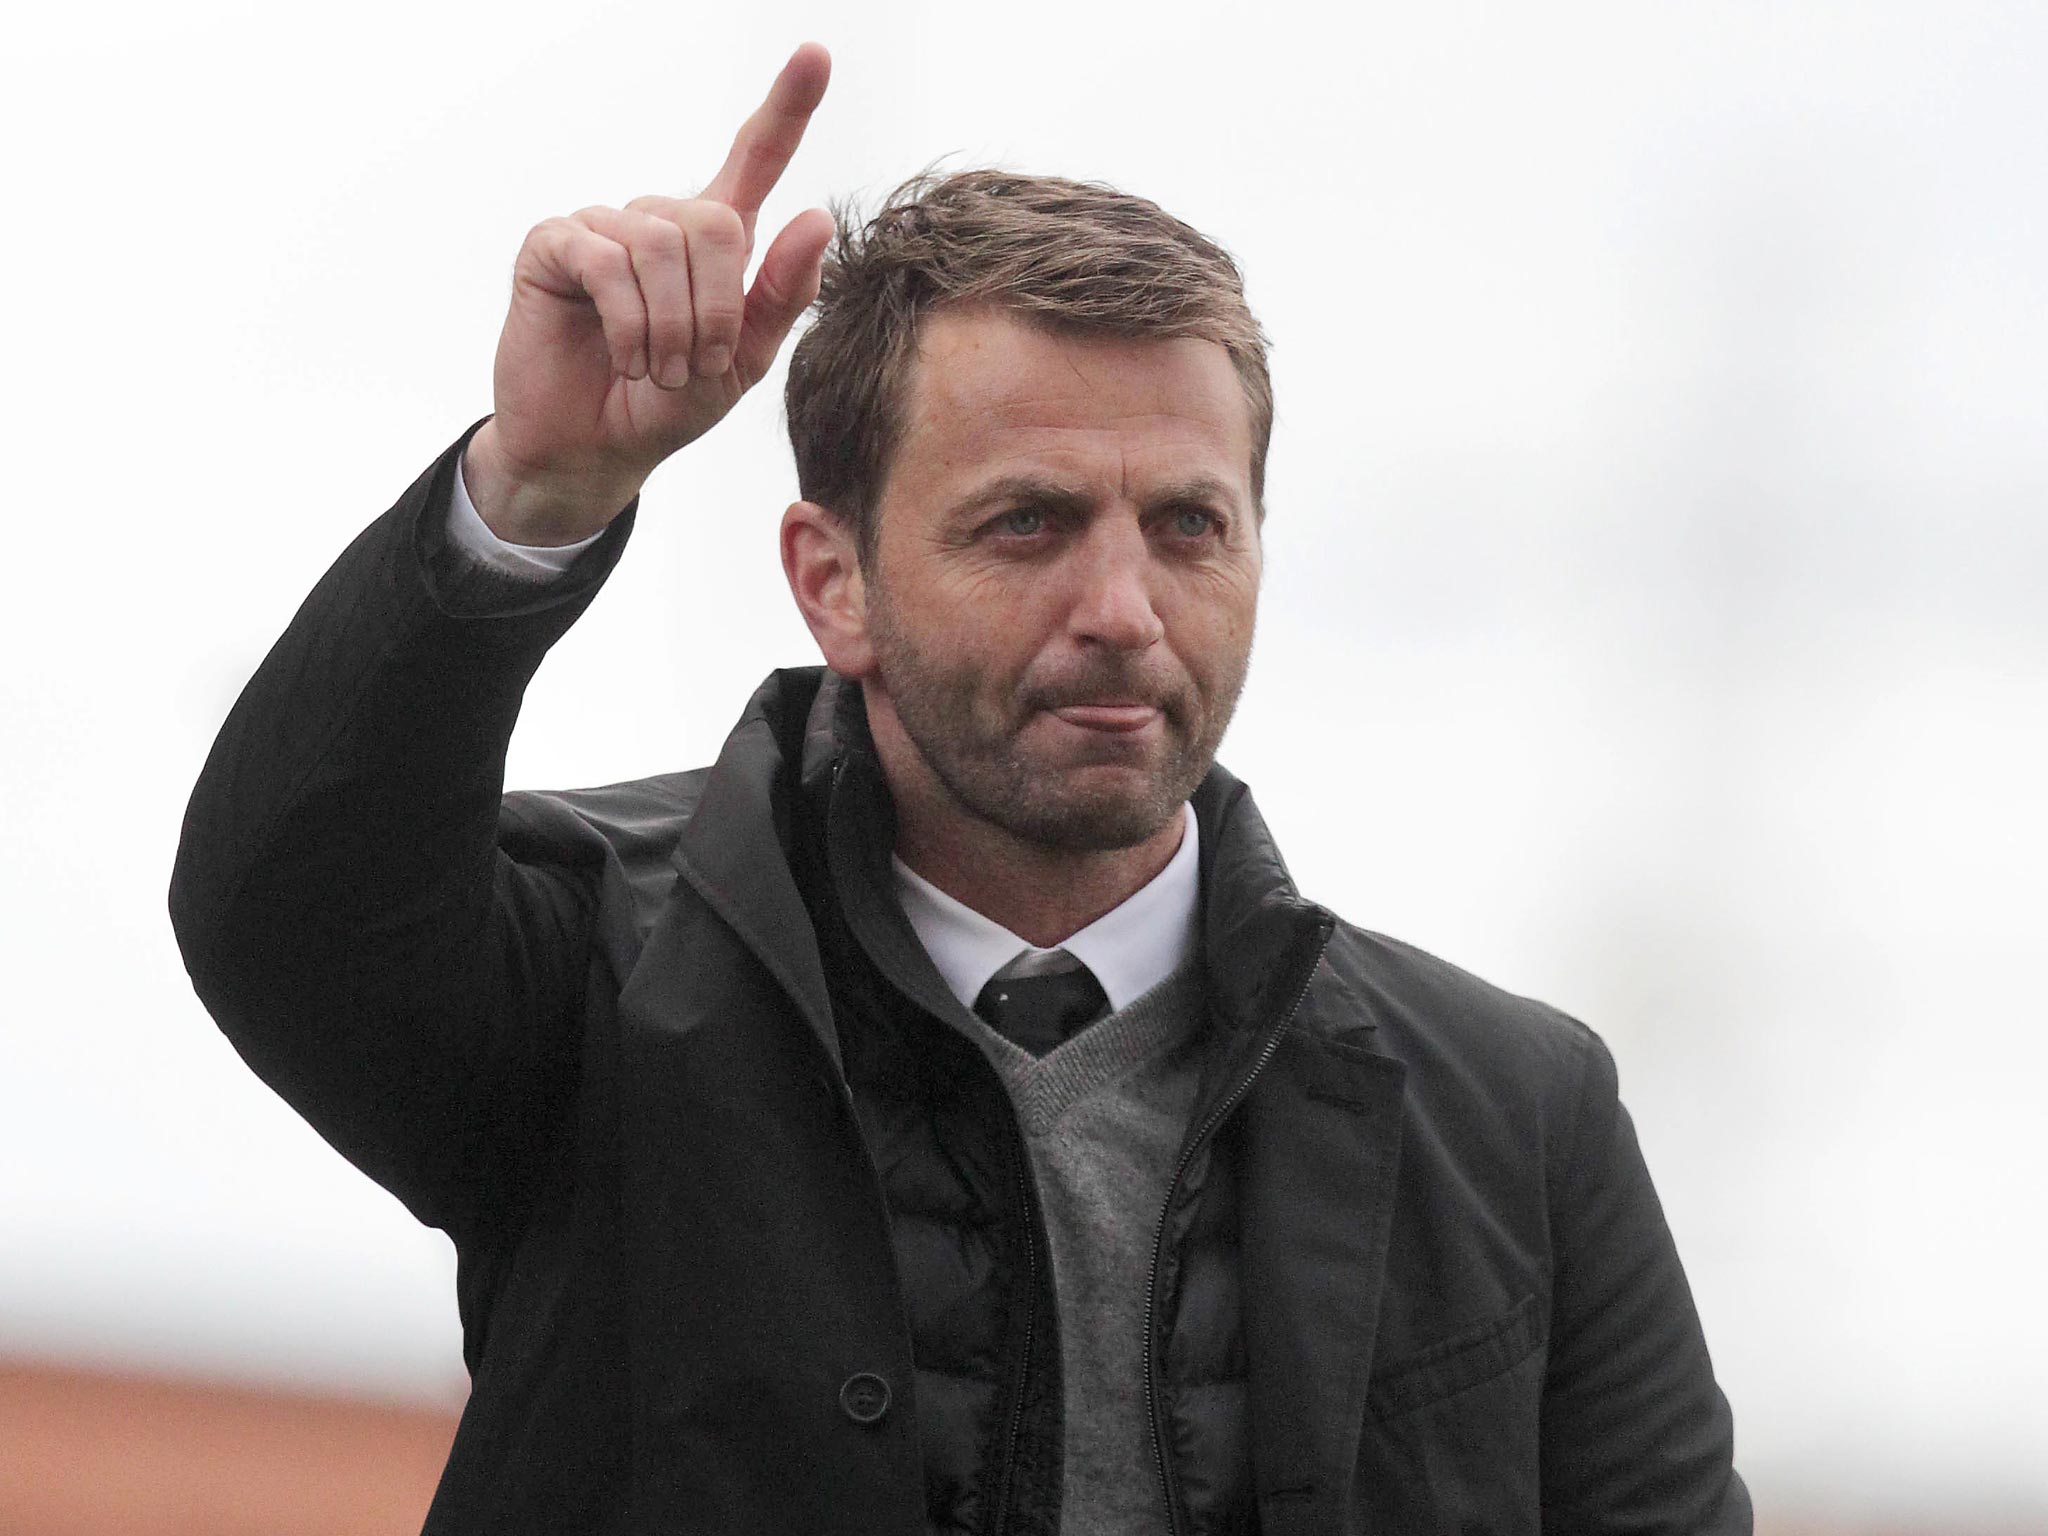 Tim Sherwood raises his hand after the 1-0 victory over Stoke